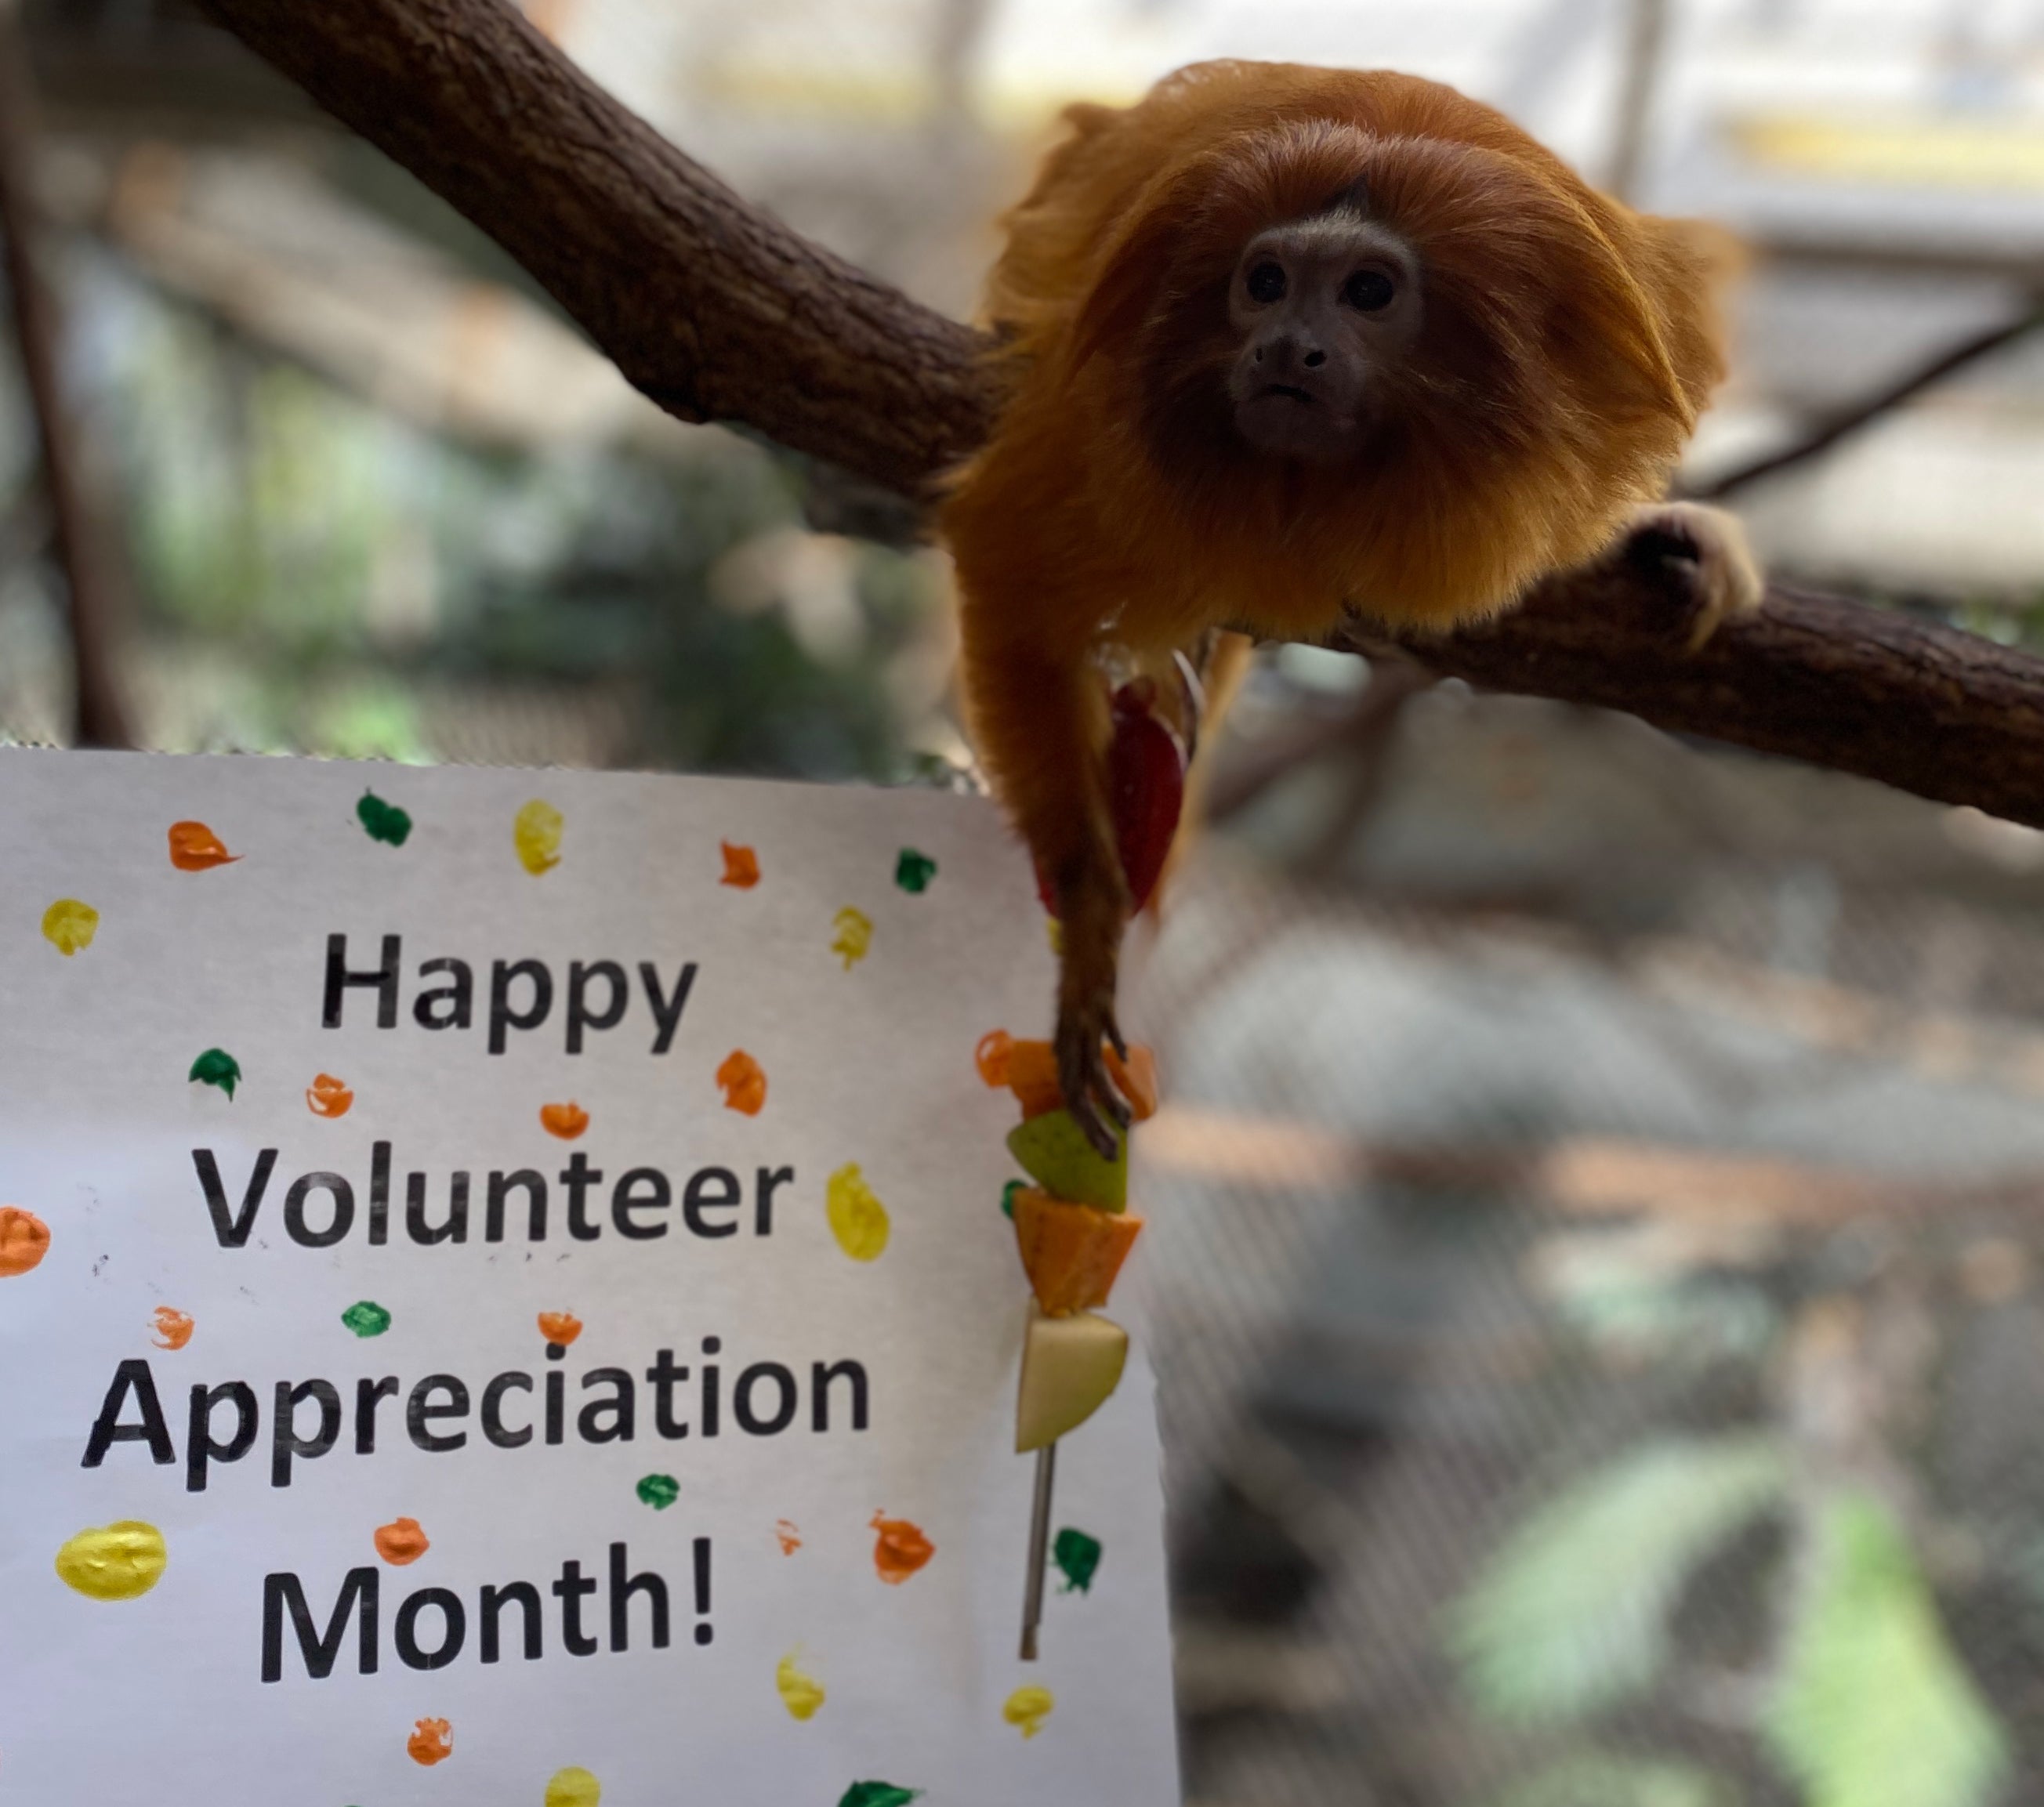 A golden lion tamarin perched on a tree branch reaches for pieces of fruit attached to a stick. The fruit is next to a sign that says "Happy Volunteer Appreciation Month!"